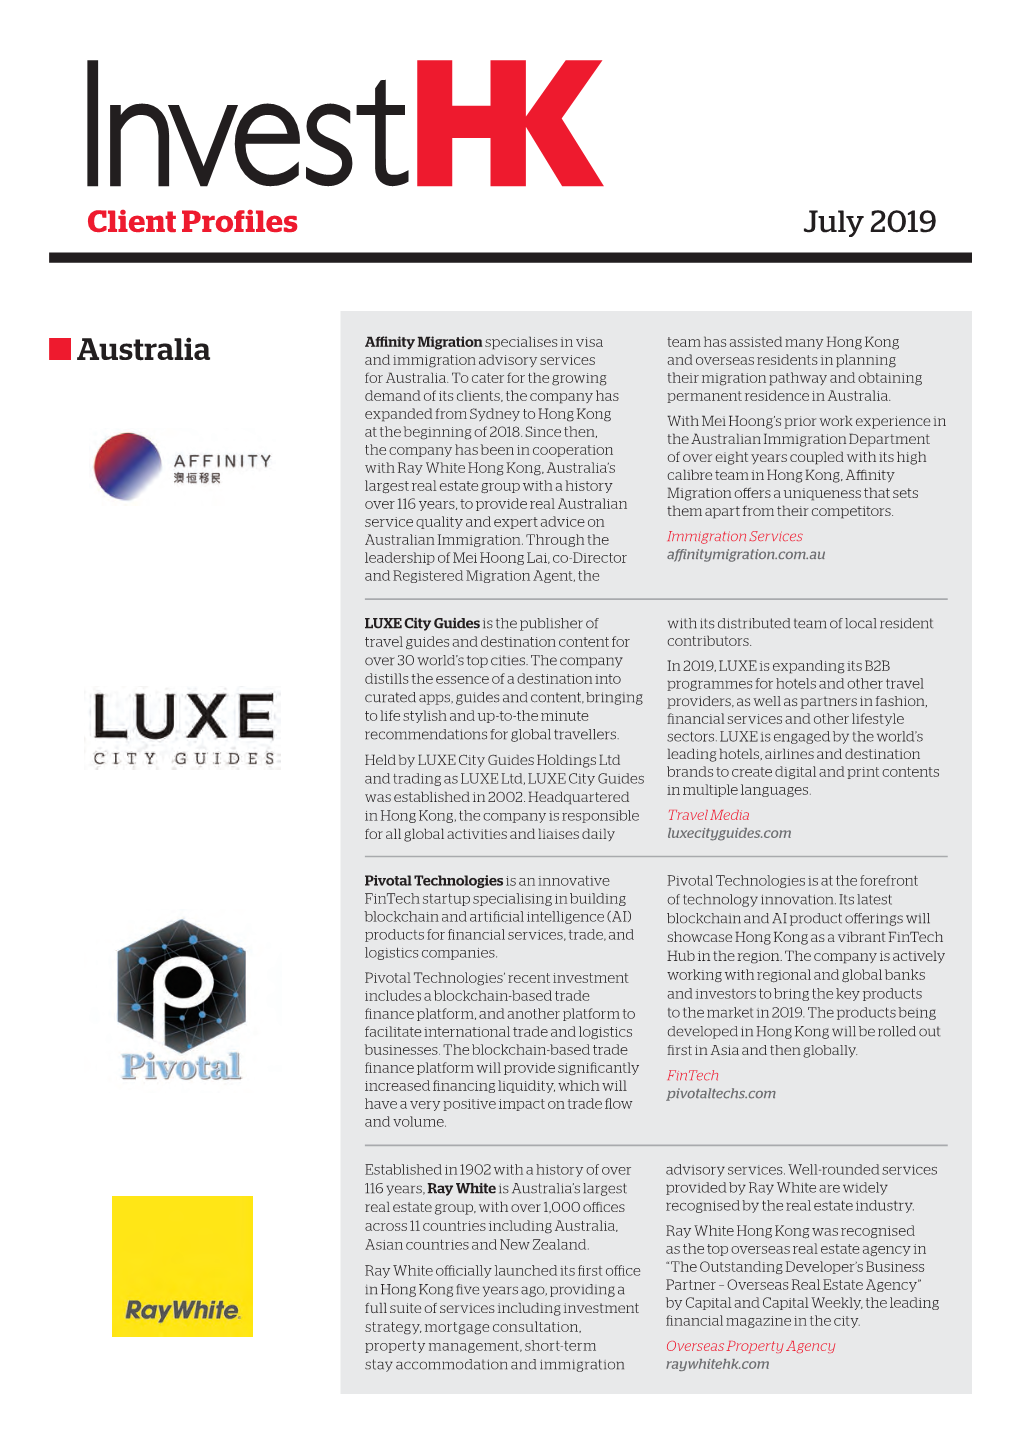 Investhk-Client Profiles, July 2019